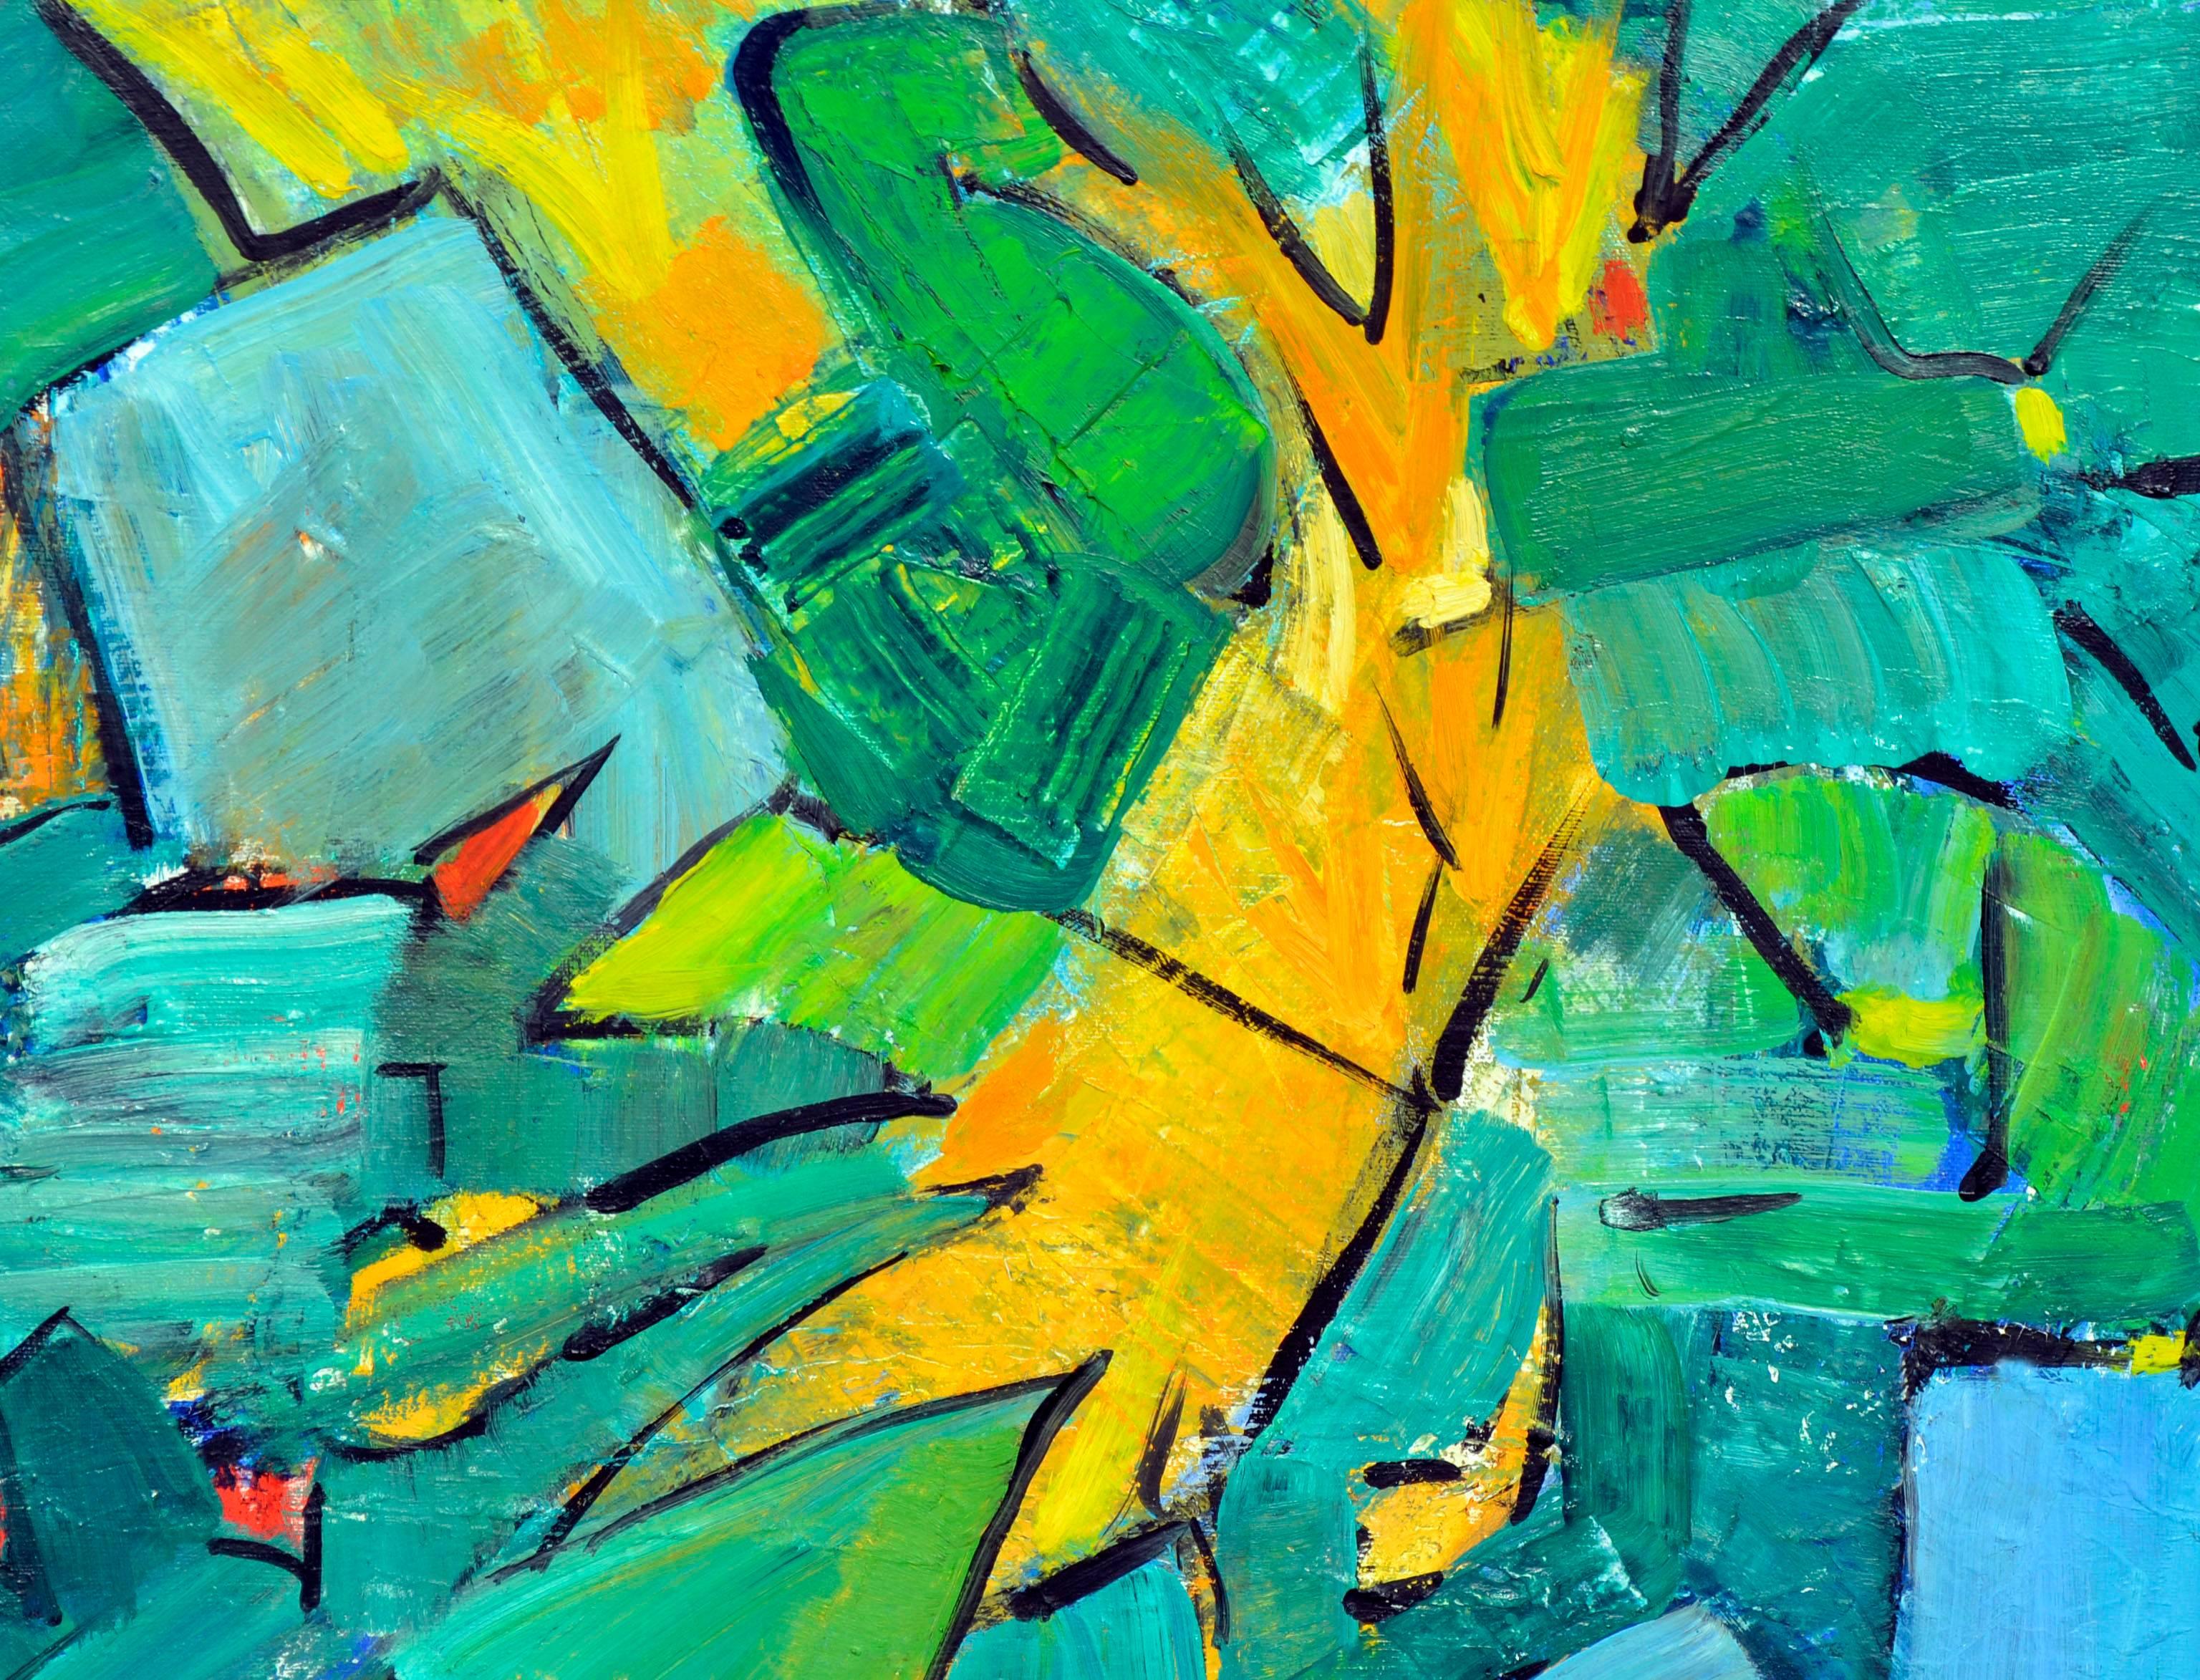 Garden Green & Cyan Abstract - Abstract Expressionist Painting by Le Besque